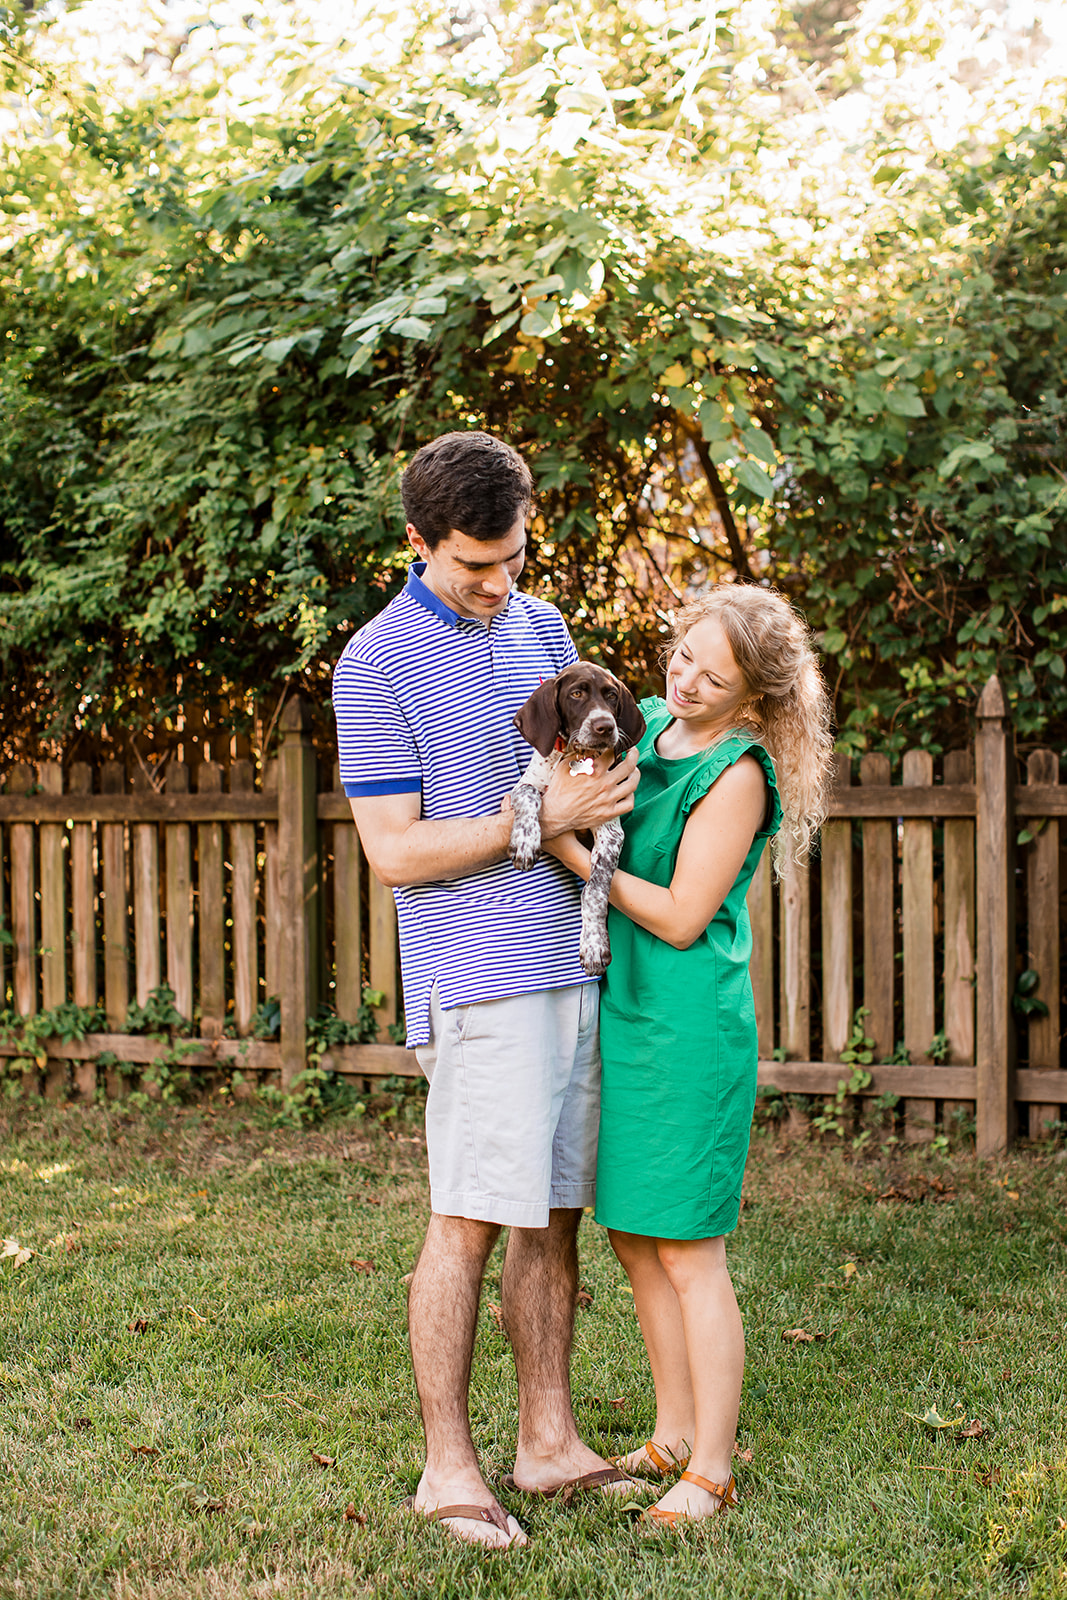 Bailey  Treys Fur Baby Filled At Home Engagement Shoot - Image Property of www.j-dphoto.com